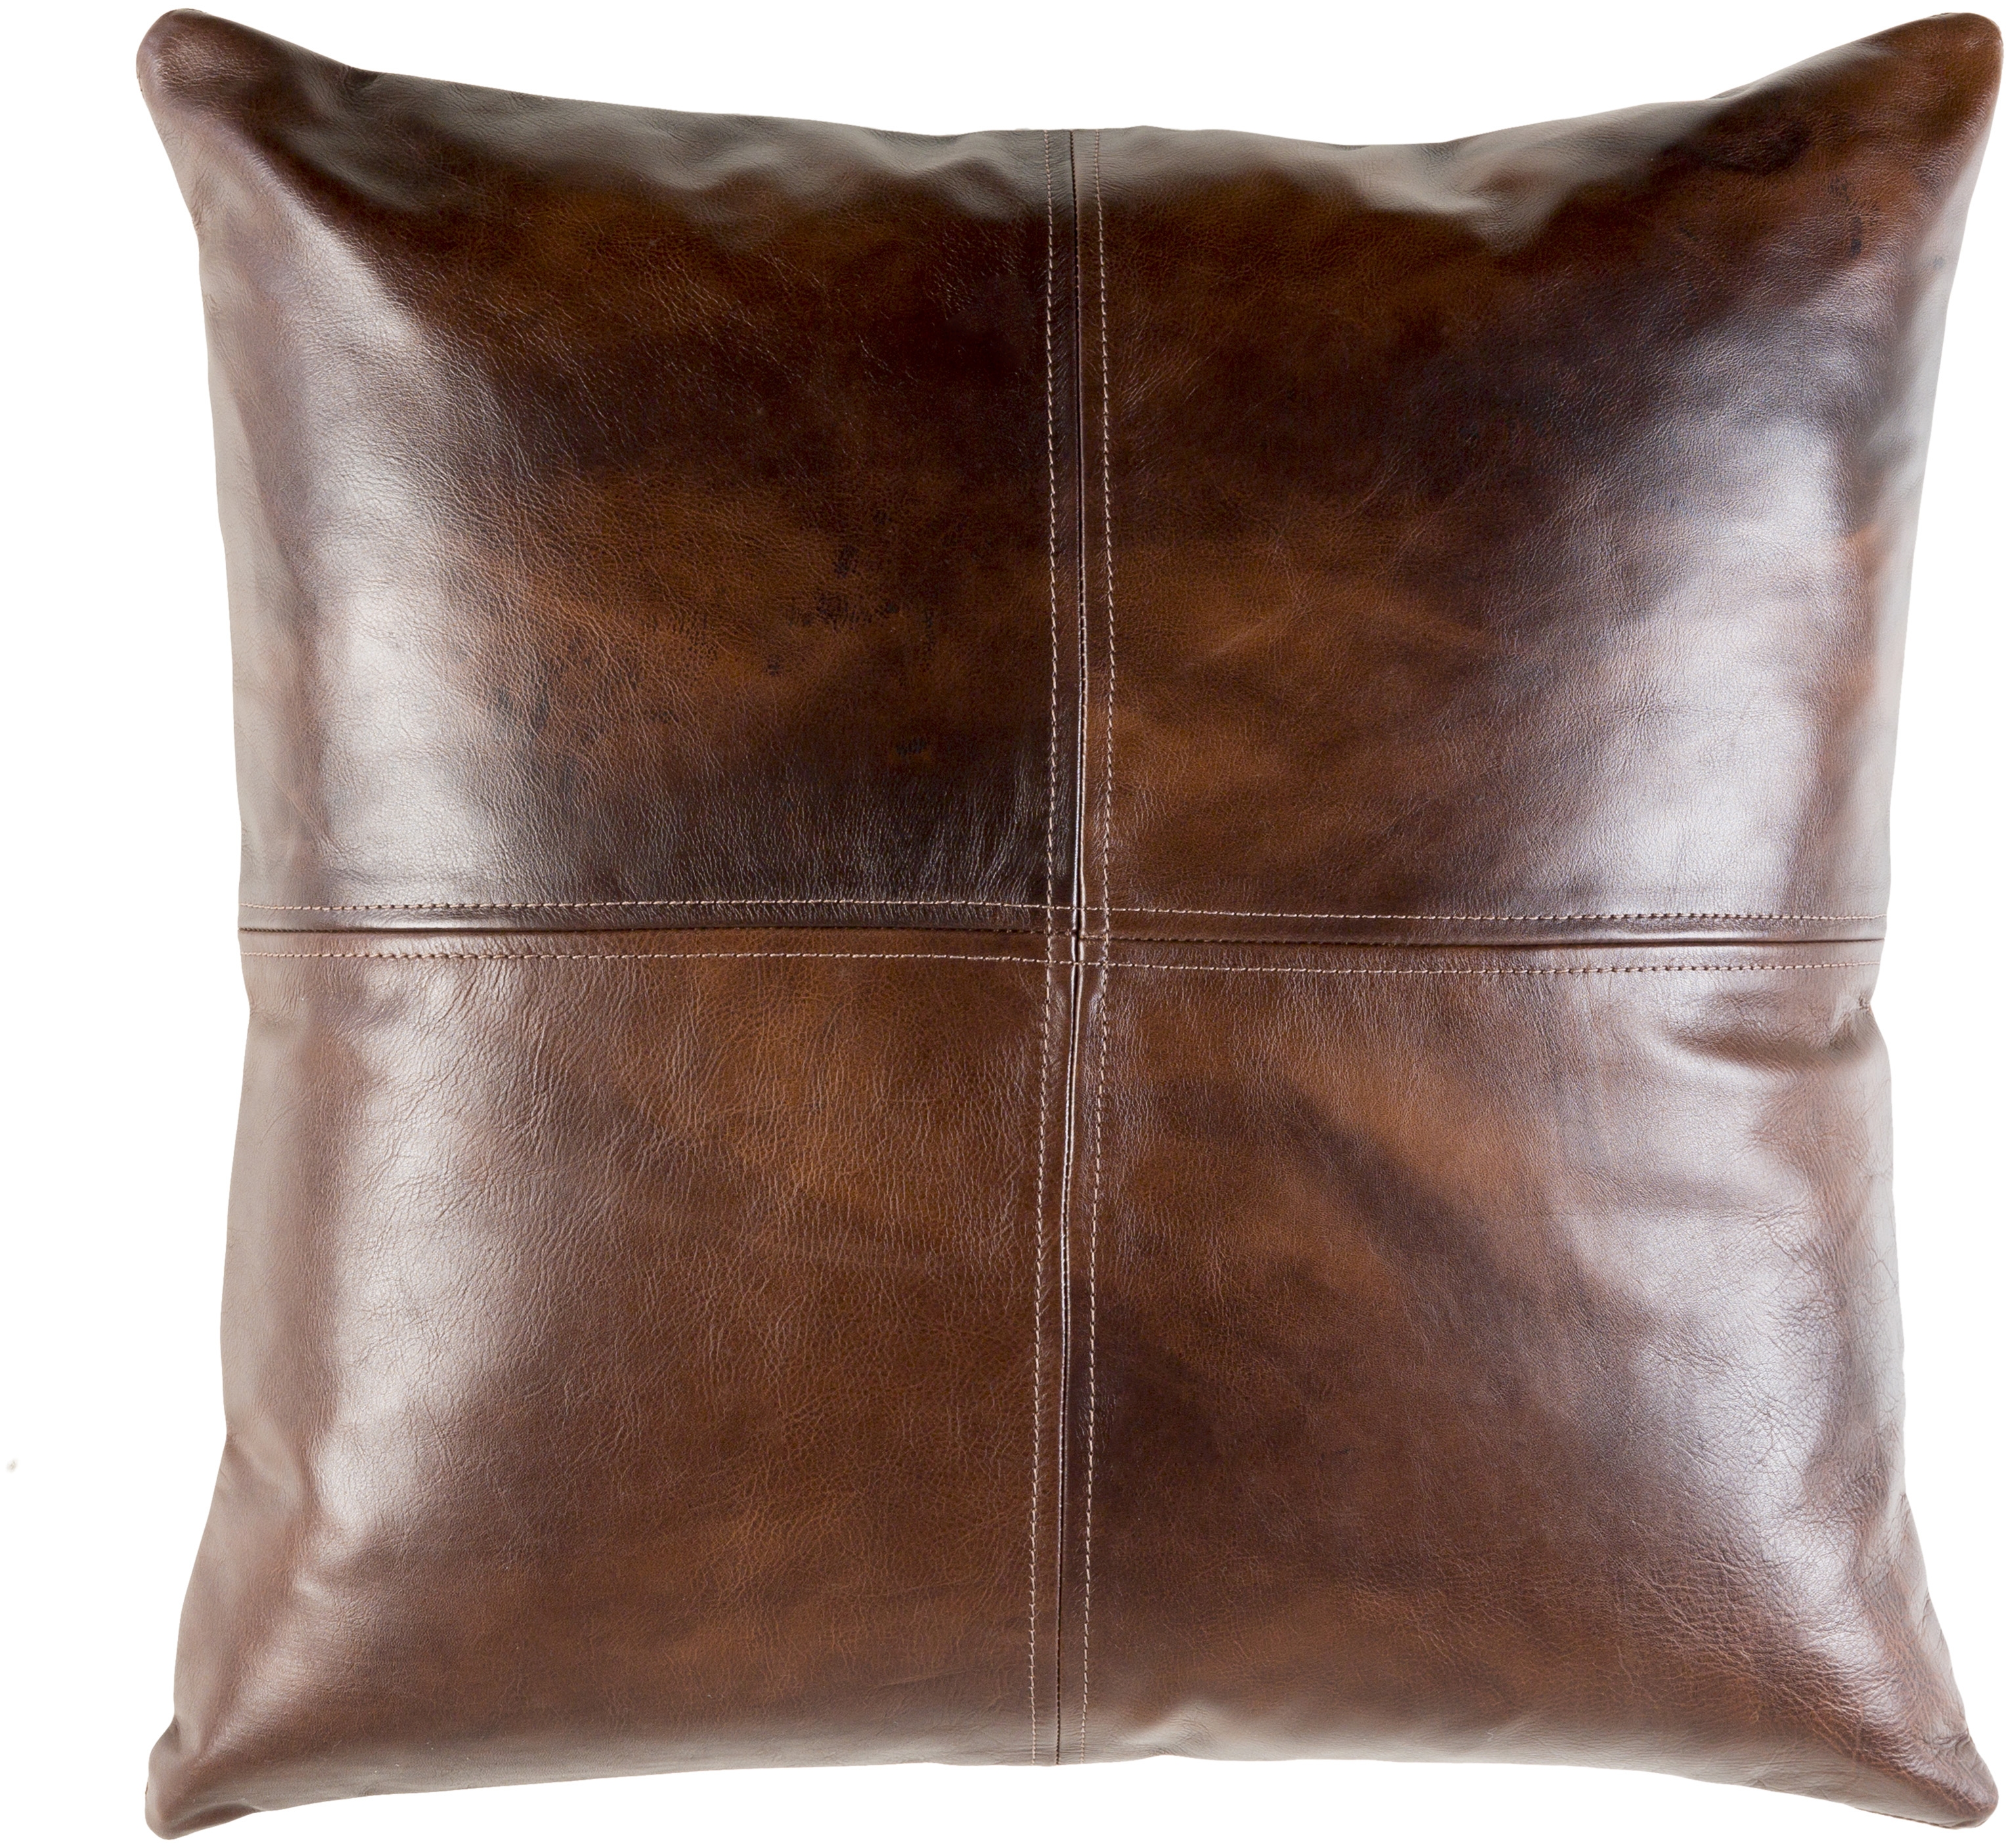 Sheffield Throw Pillow, 20" x 20", with poly insert - Image 0